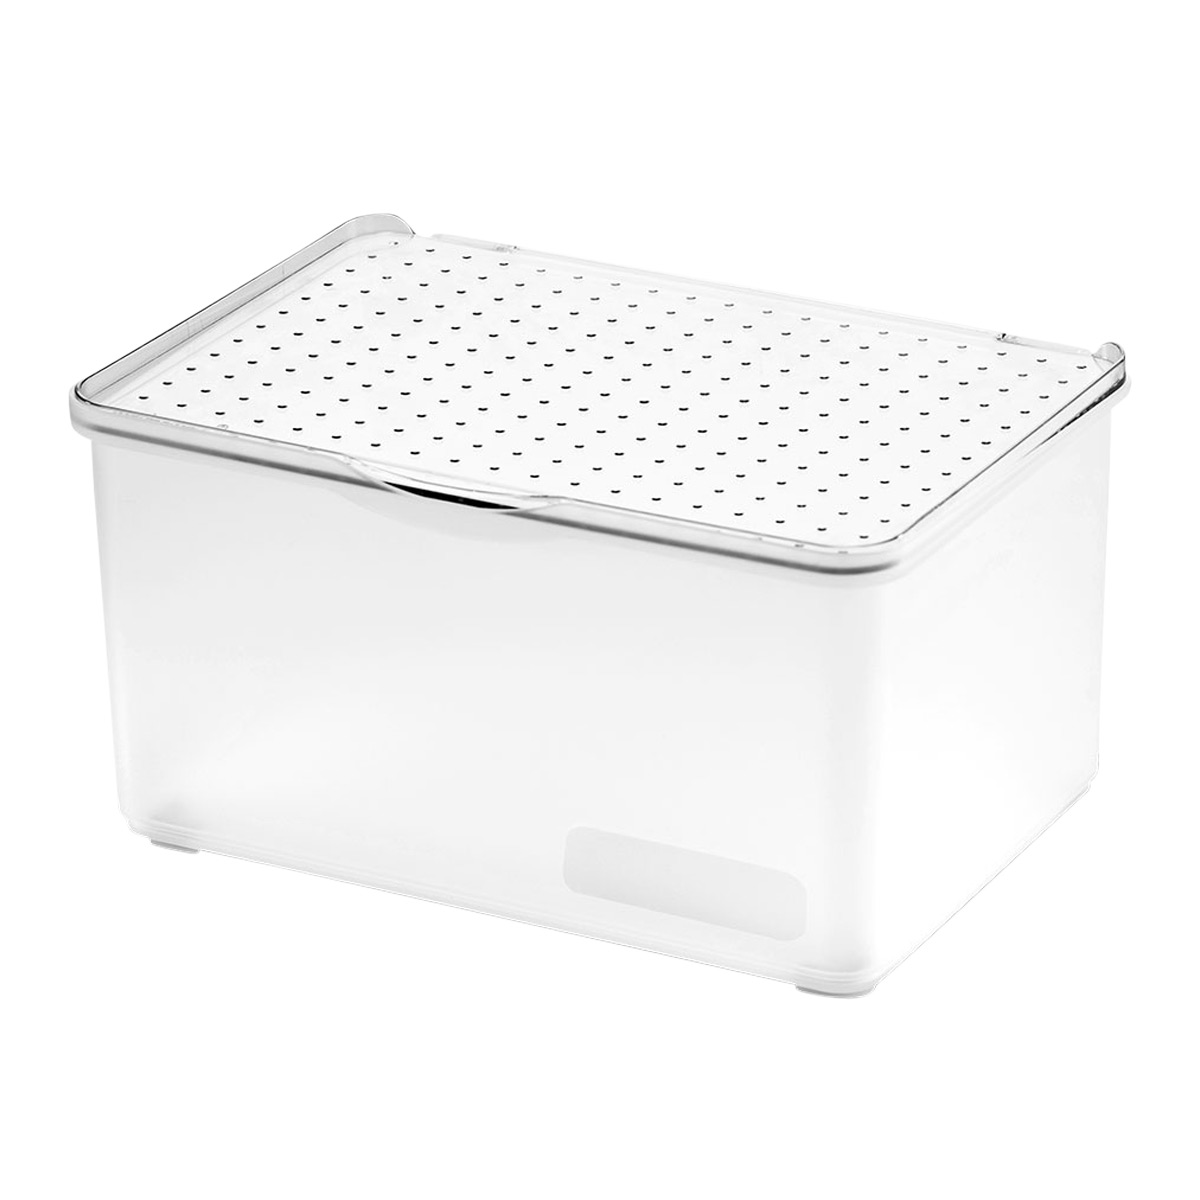 https://www.containerstore.com/catalogimages/428565/10085403-madesmart-Medium-Stacking-B.jpg